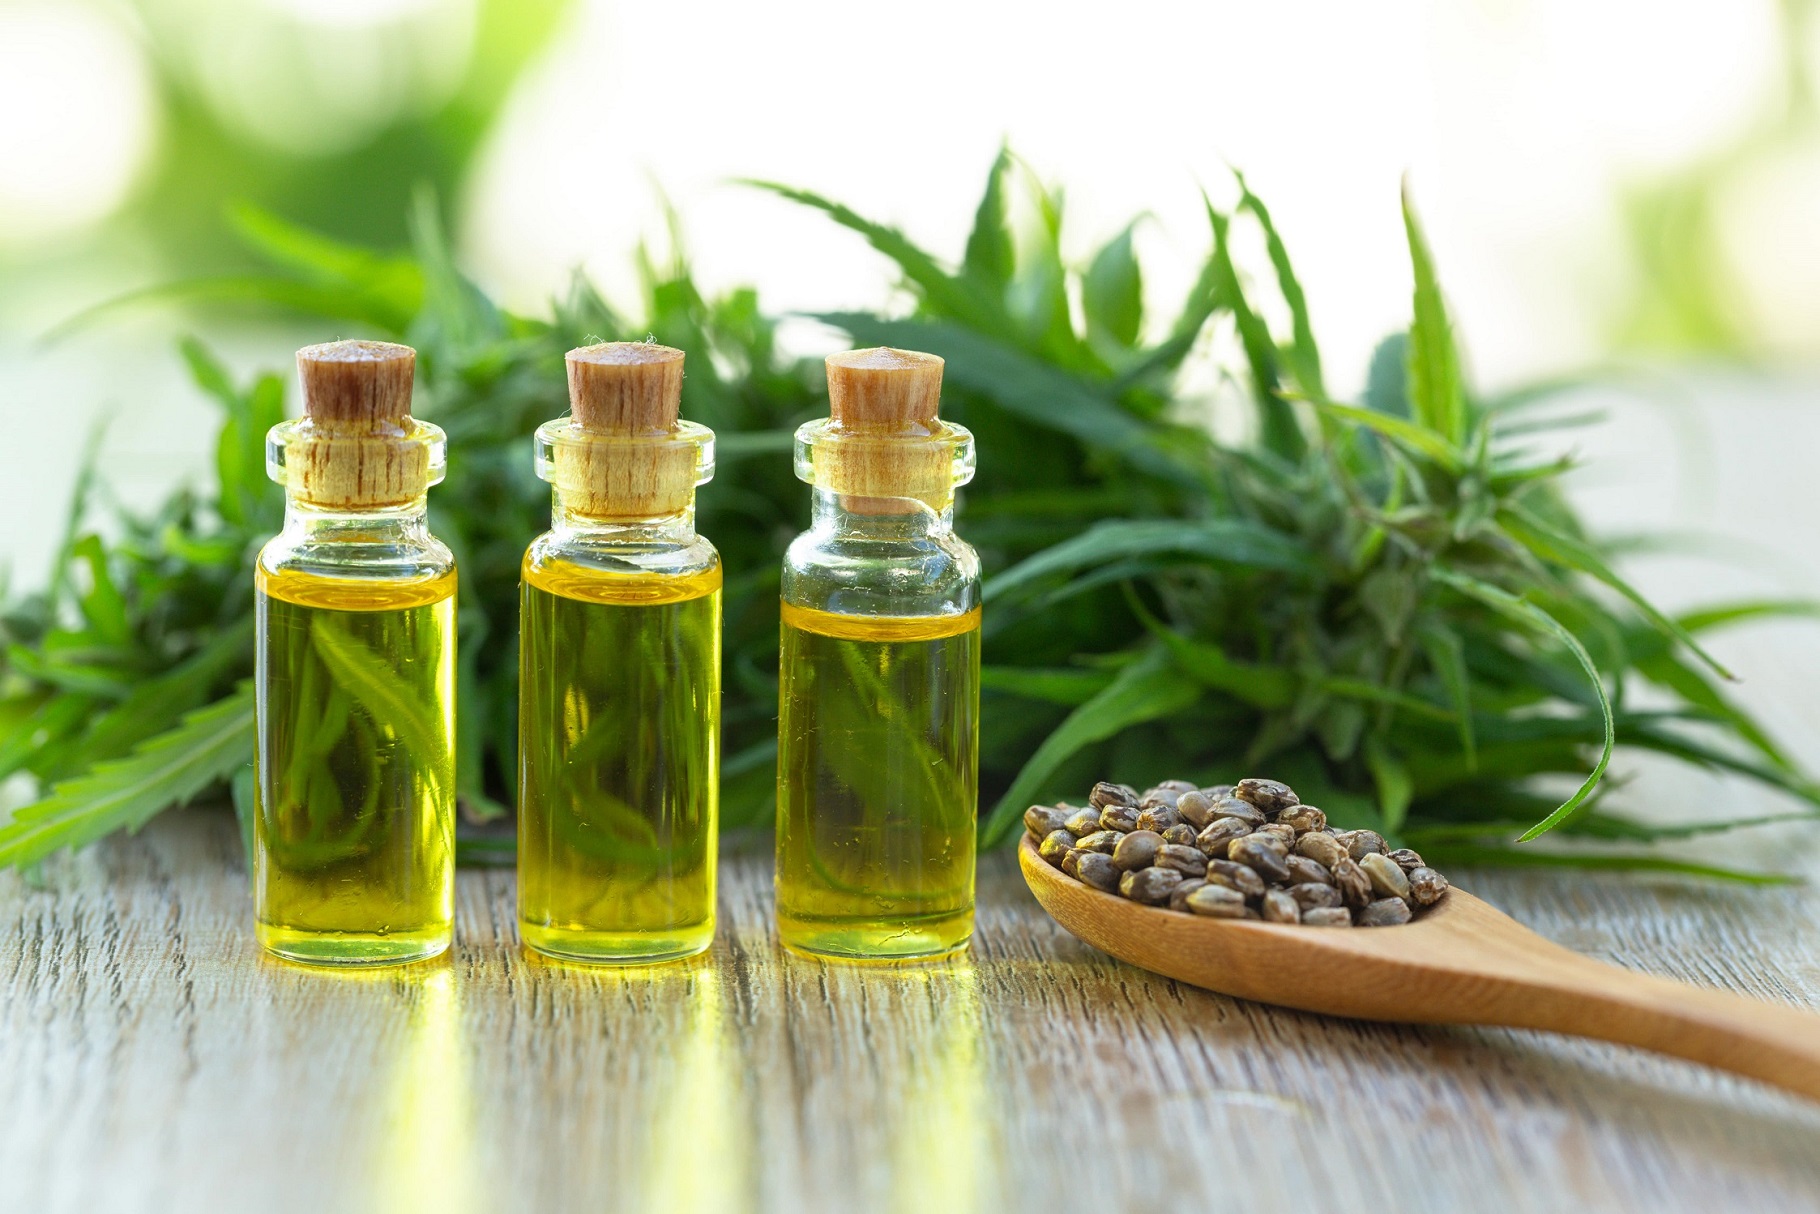 Why You Should Not Buy CBD Oil on Amazon